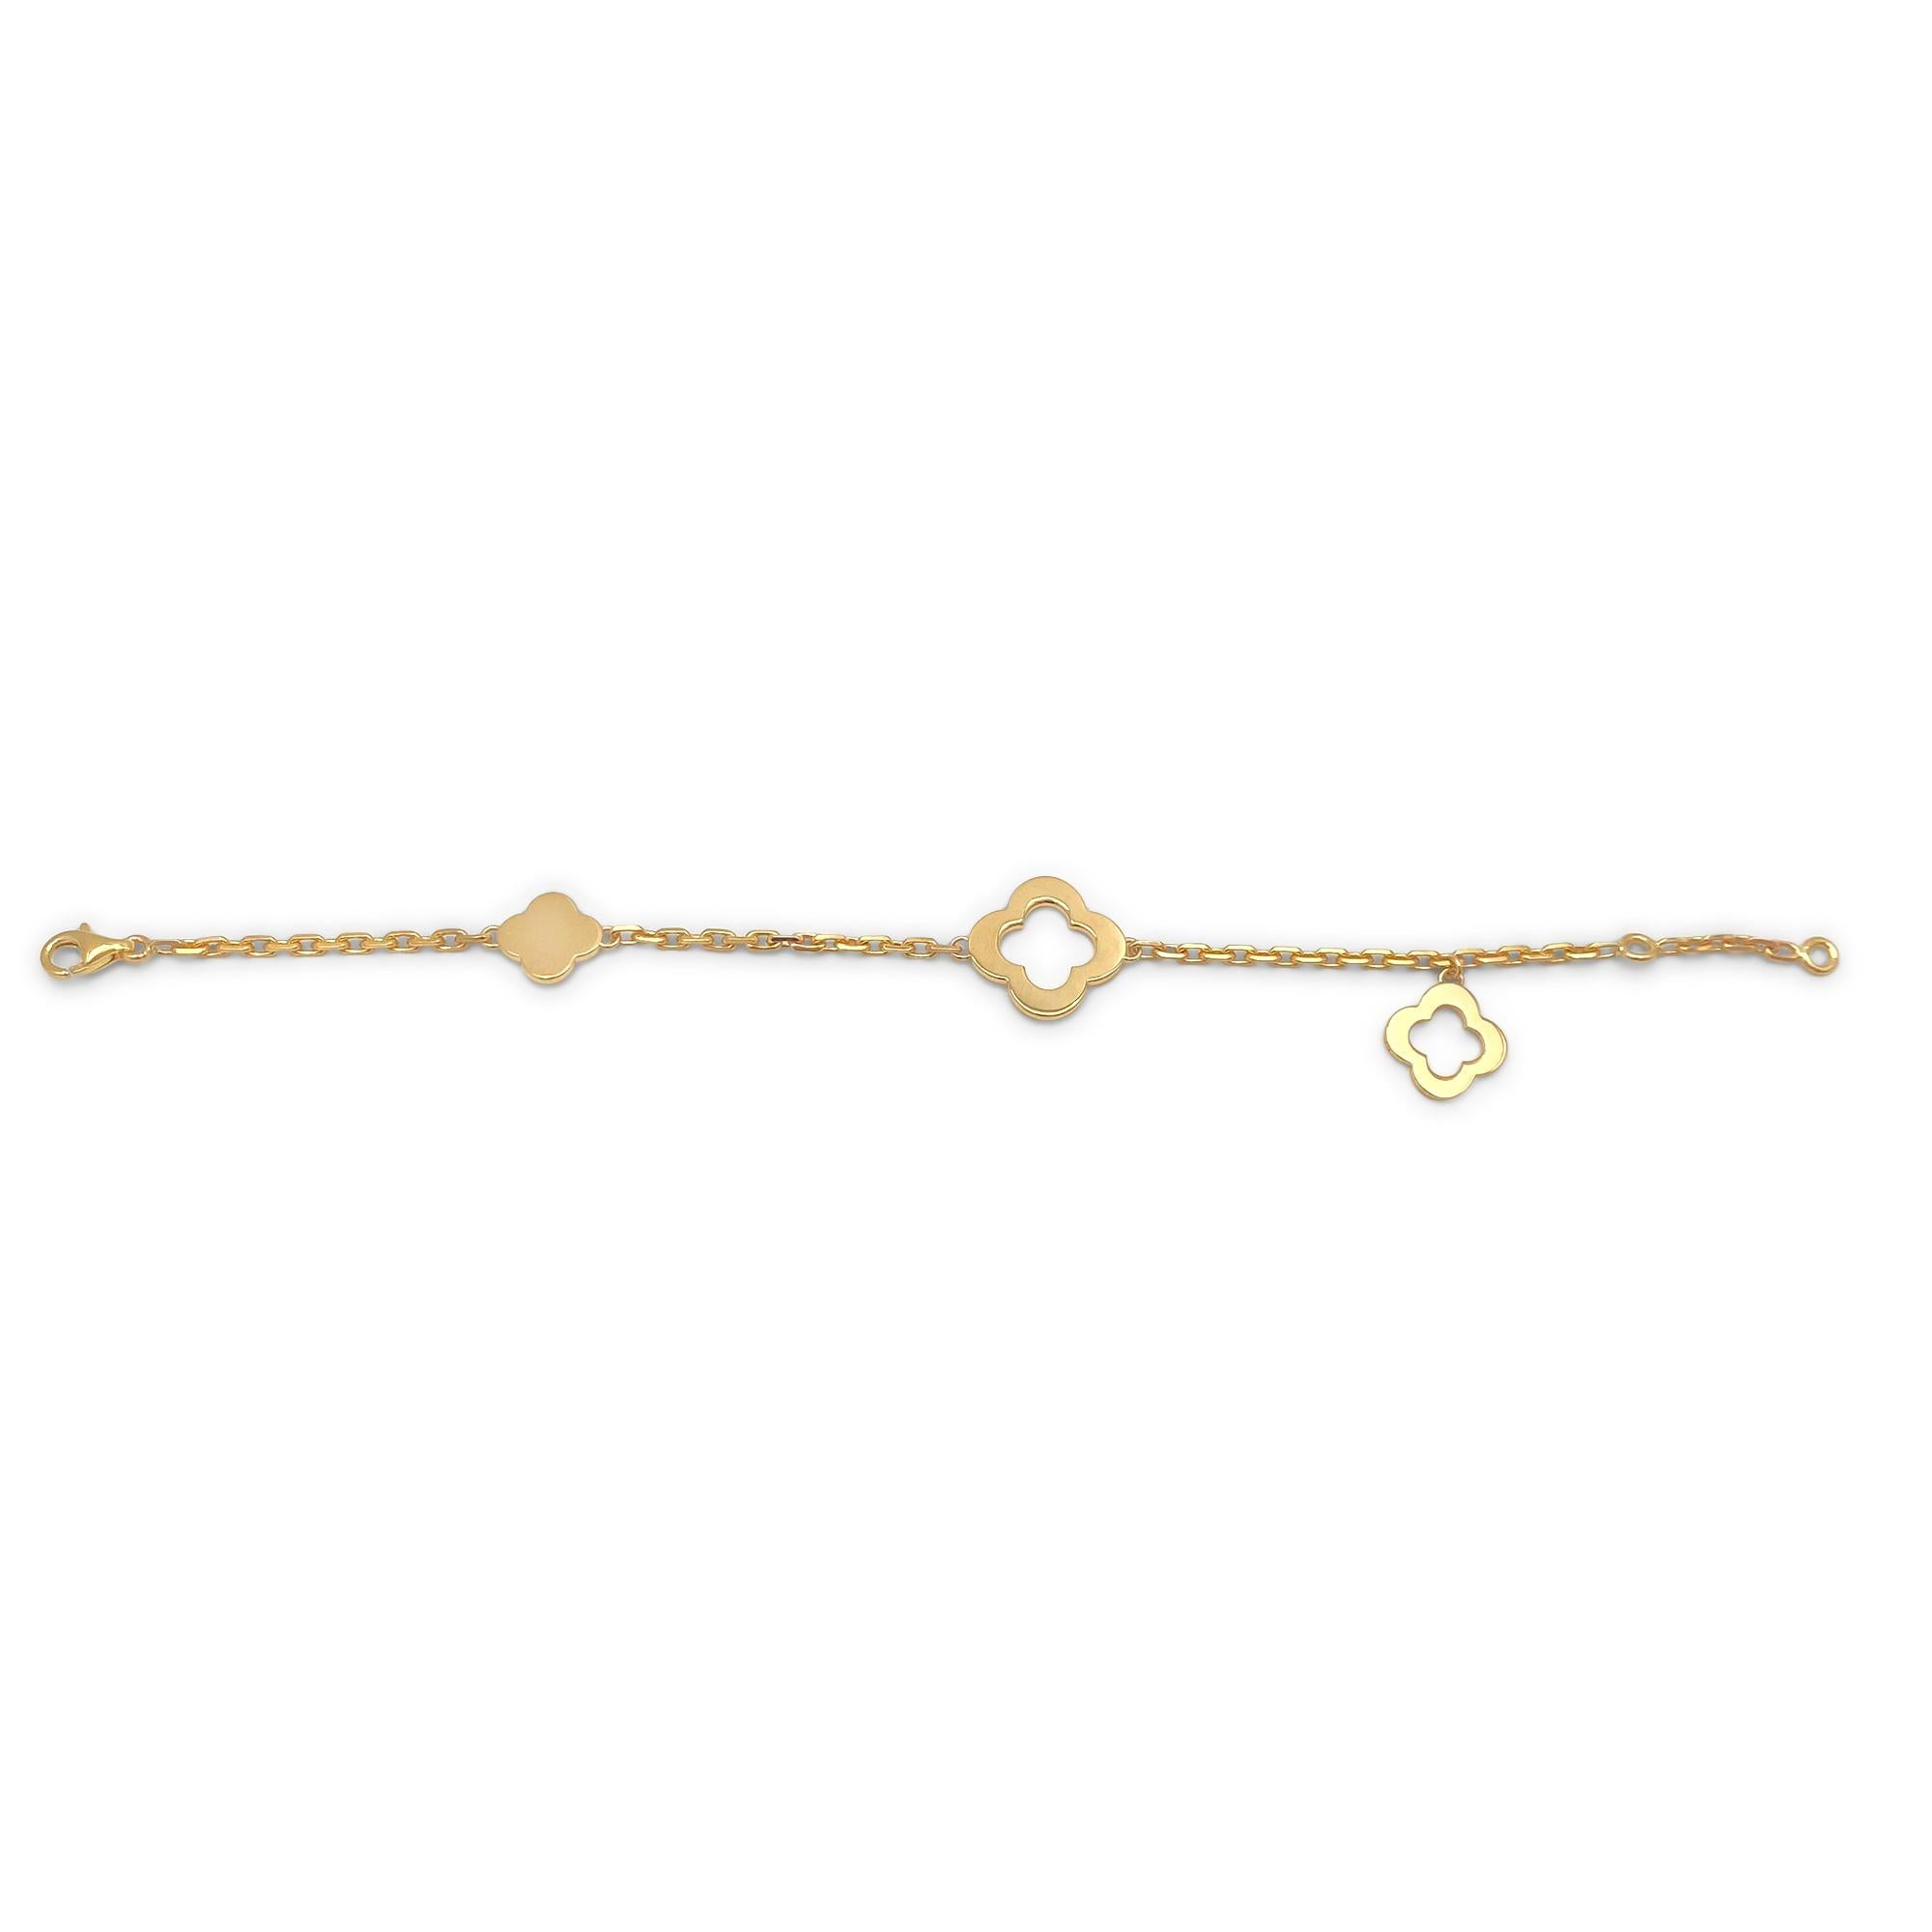 Authentic Van Cleef & Arpels Byzantine Alhambra bracelet crafted in 18 karat yellow gold.  The bracelet features a combination of solid and openwork motifs of varying sizes and measures 7 1/4 inches in length.  Signed VCA, Au750, with serial number